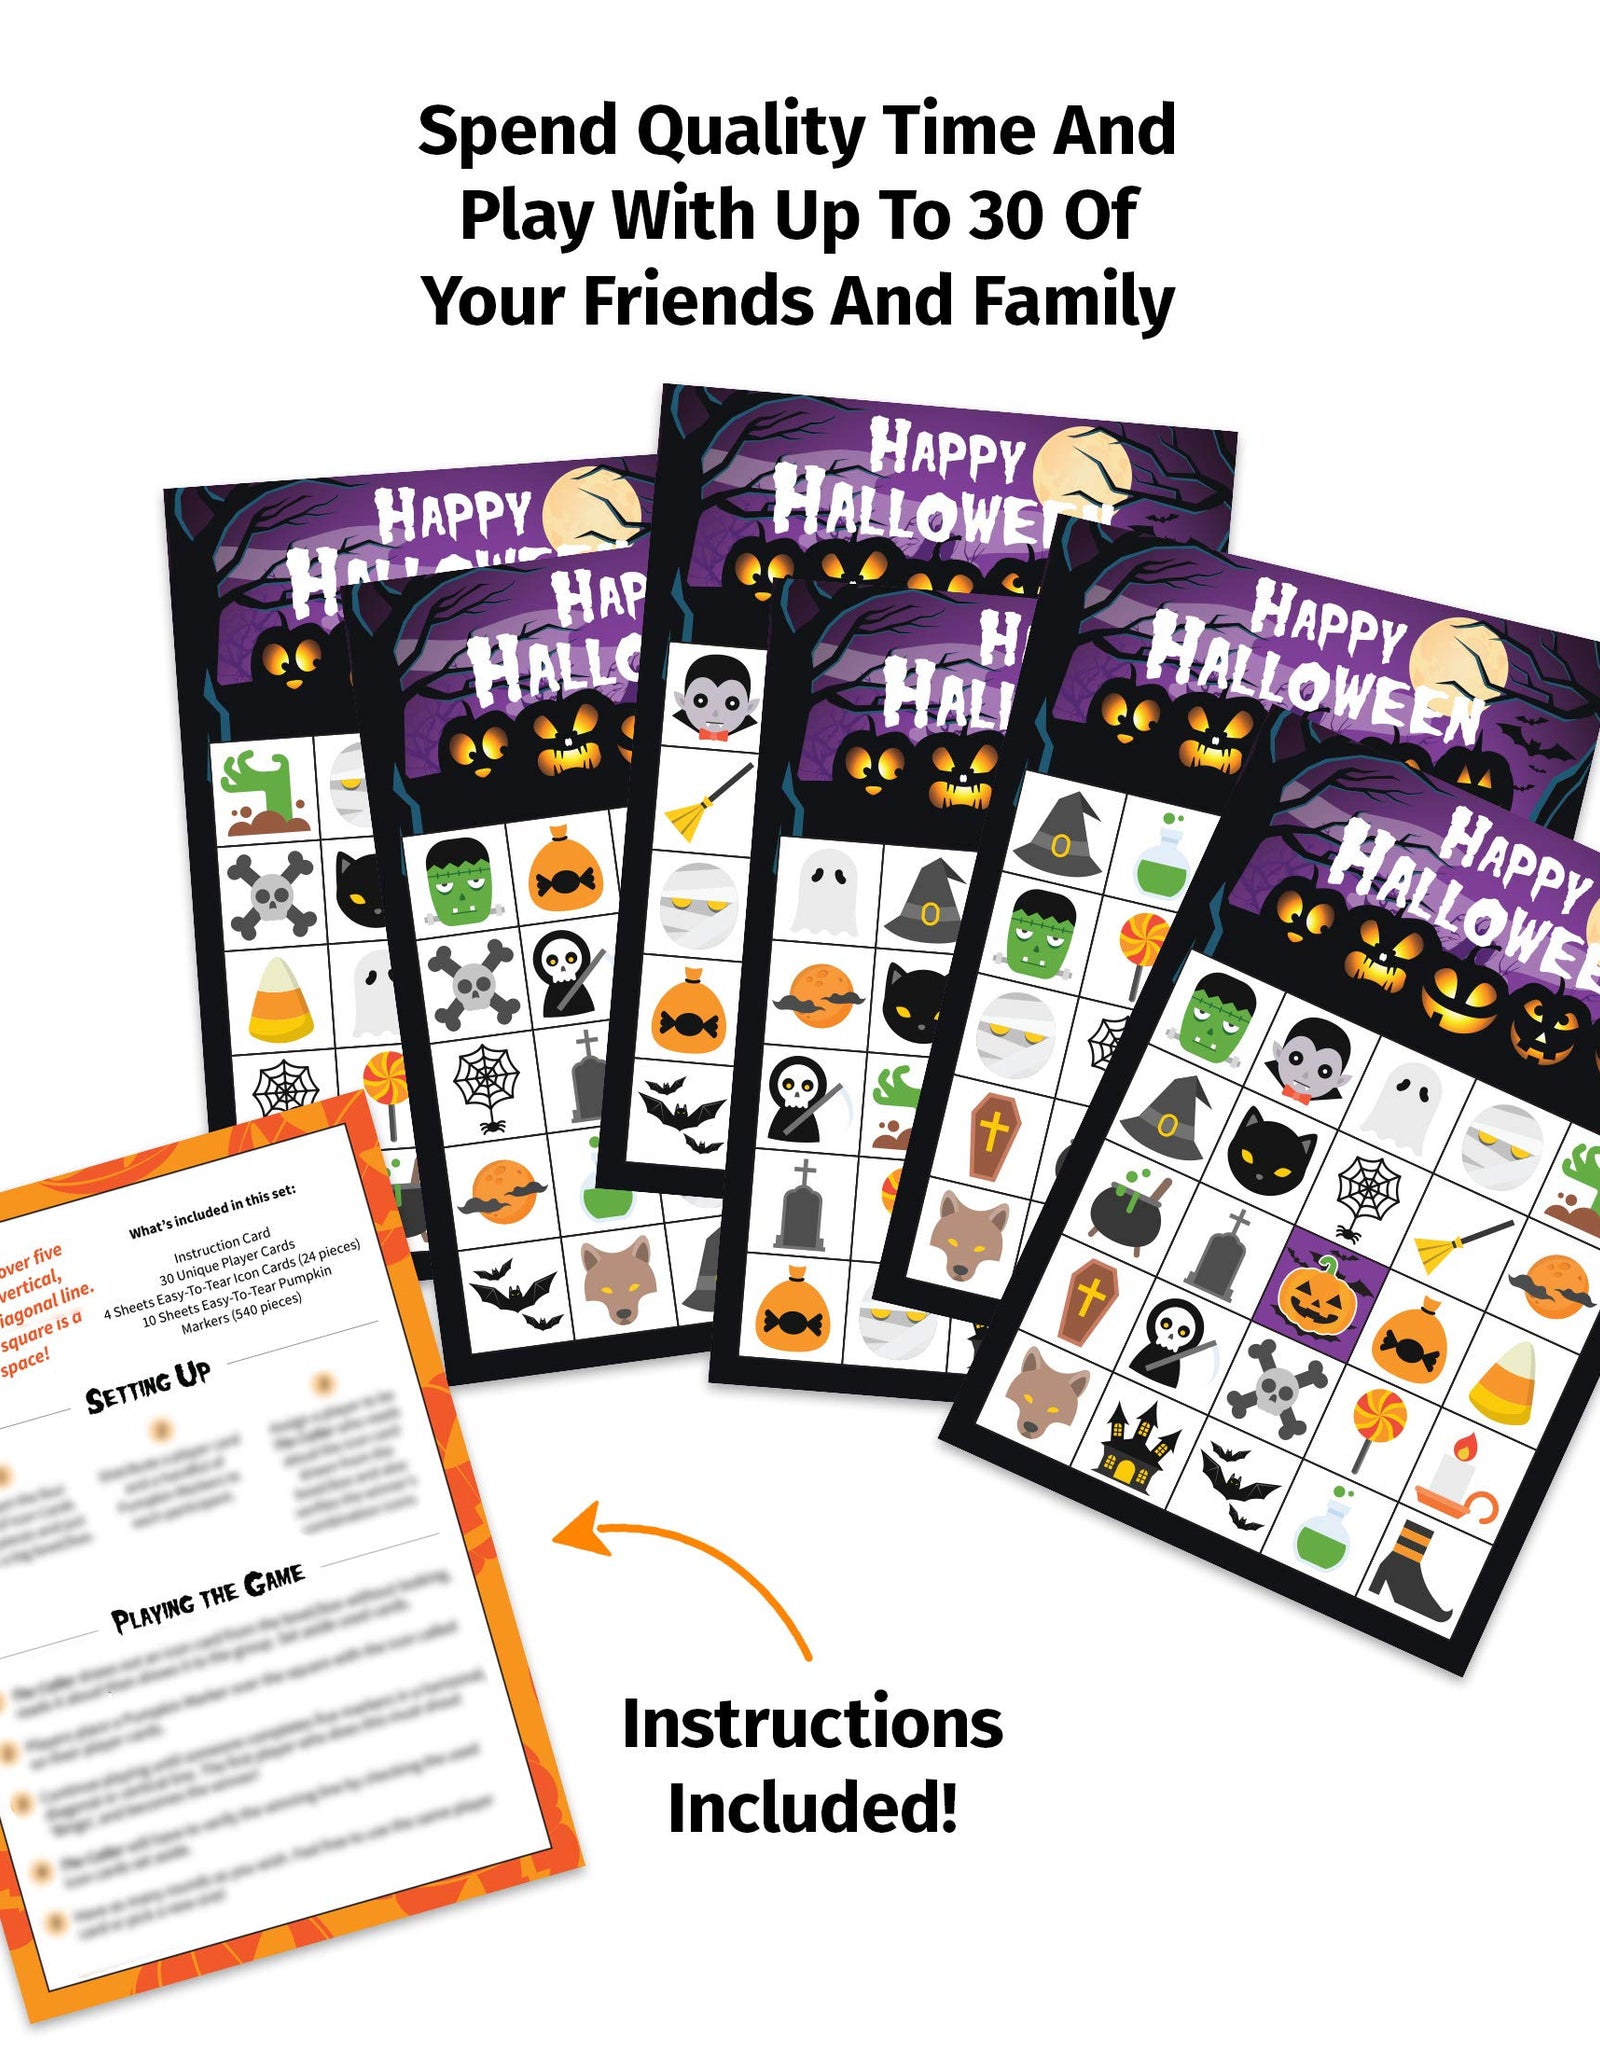 Halloween Bingo Game Set - 30 Player Cards Pack - Halloween Party Games for Kids, Adults & Family Activity - Halloween Crafts for Classroom School Supplies Board Games